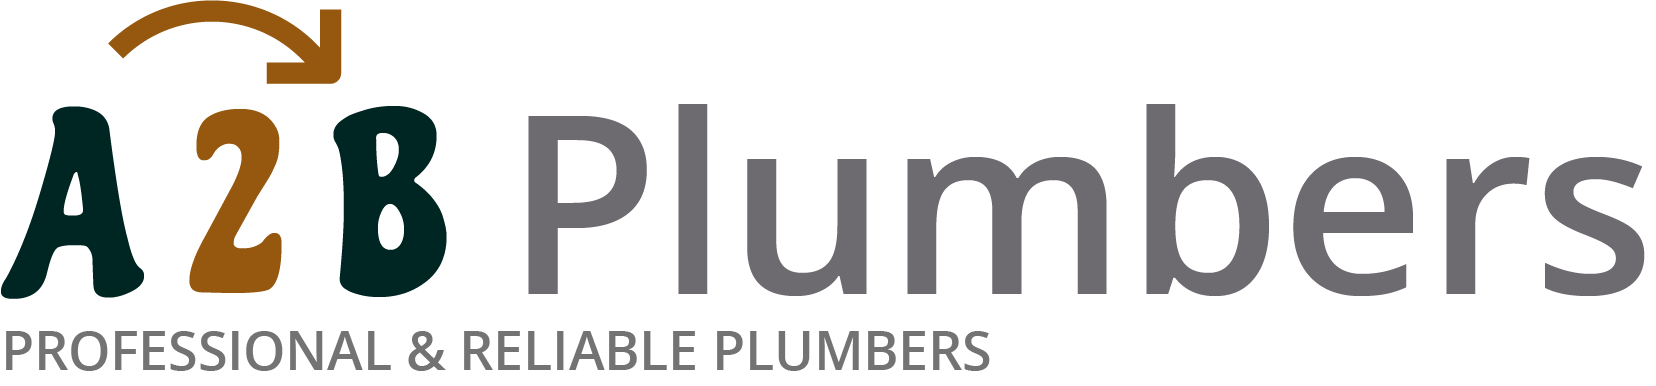 If you need a boiler installed, a radiator repaired or a leaking tap fixed, call us now - we provide services for properties in Plympton and the local area.